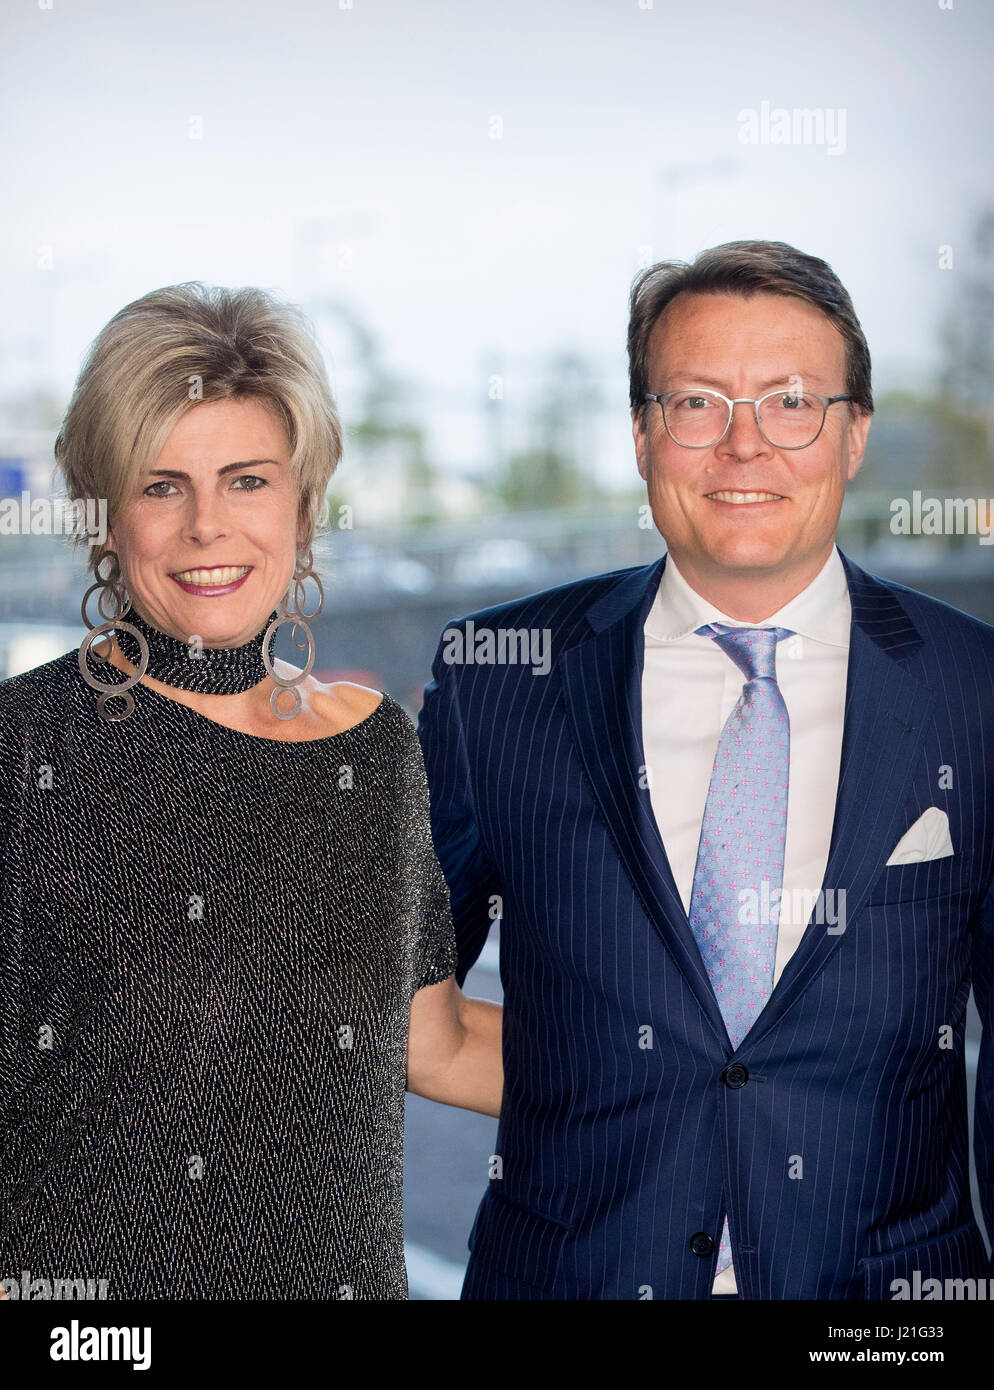 Prince Constantijn and Princess Laurentien attend the award ceremony of the World Press Photo in Muziekgebouw Aant IJ in Amsterdam, The Netherlands, 22 April 2017. Winner of this year is Turkish AP photographer Burhan Ozbilici with his winning picture the murder of Russian ambassador Andrey Karlov 19 December in Ankara. Photo: Patrick van Katwijk NETHERLANDS OUT POINT DE VUE OUT - NO WIRE SERVICE - Photo: Patrick van Katwijk/Dutch Photo Press/dpa Stock Photo